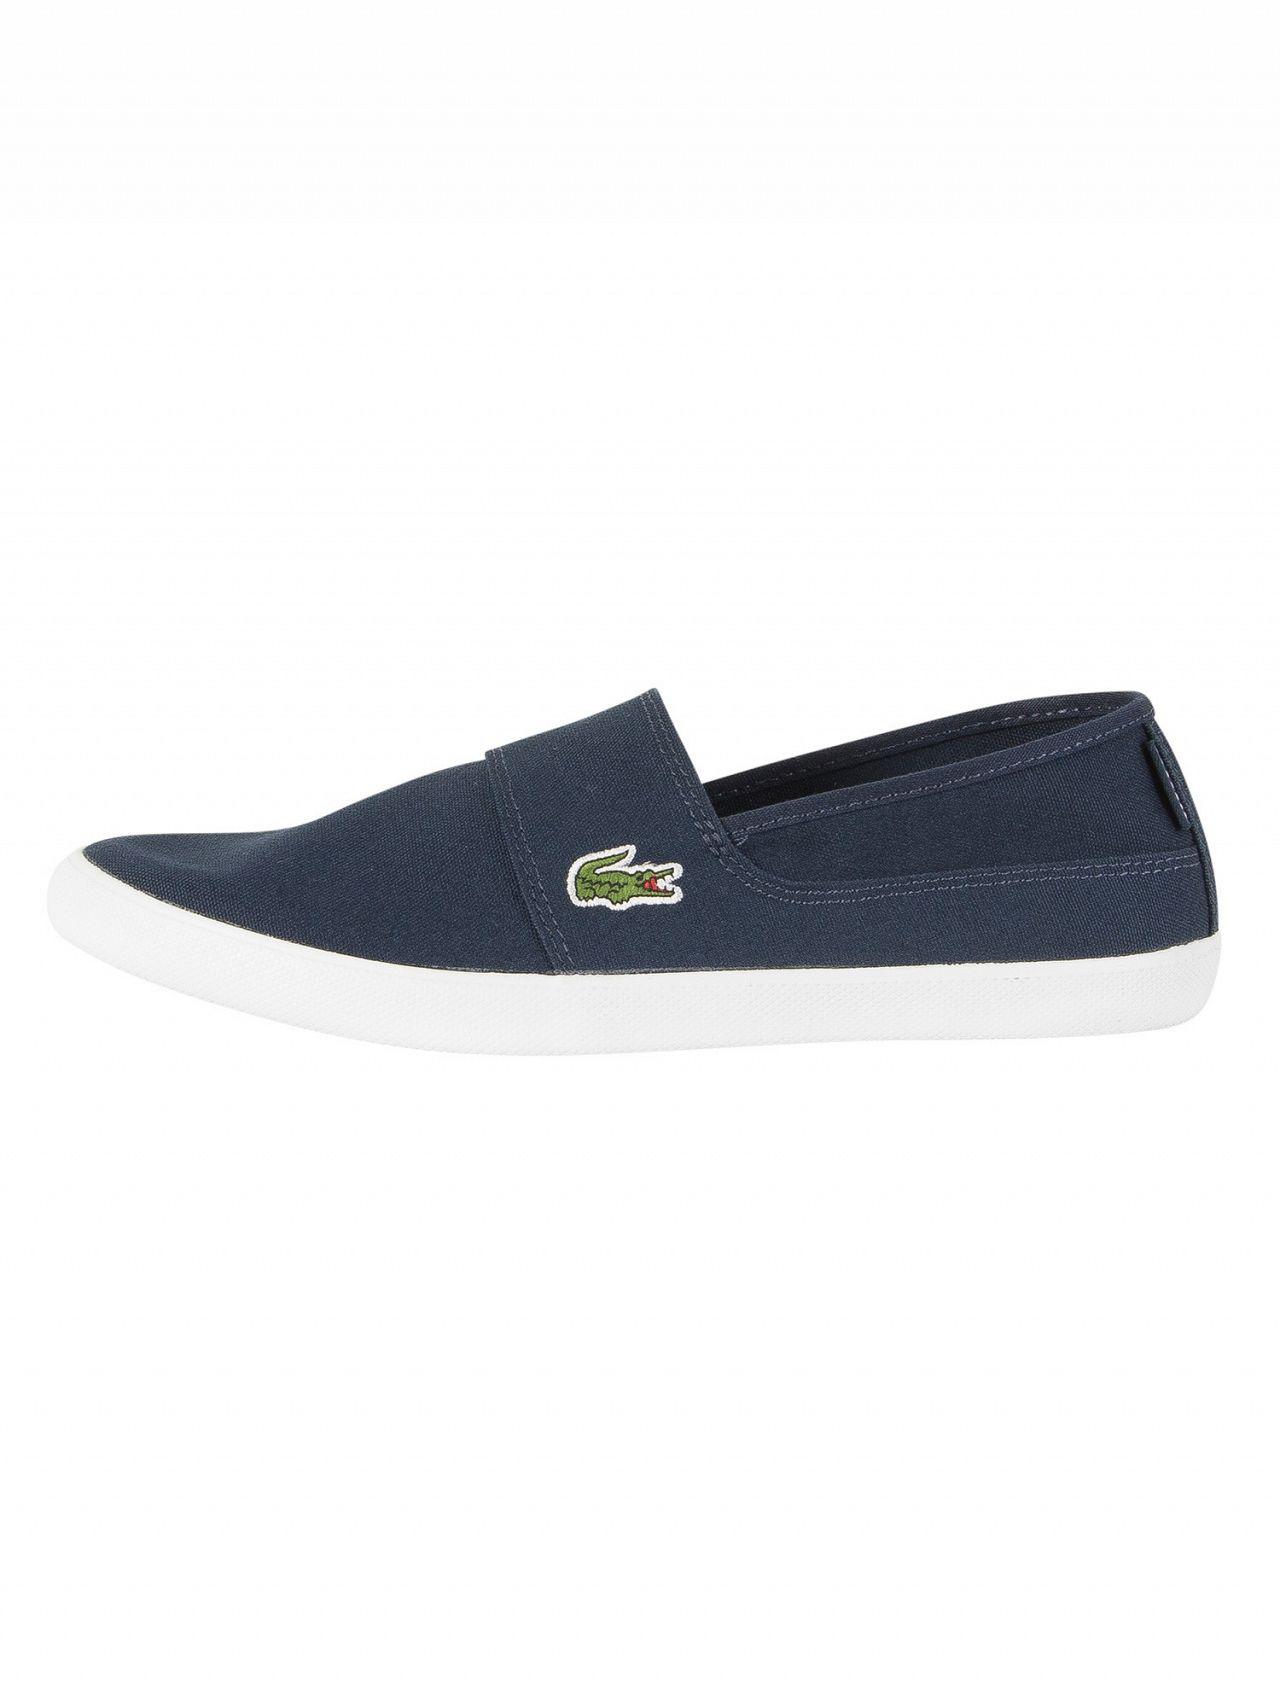 Lacoste Marice BL 2 Noir blanc Canvas Hommes Slip-ons Chaussures 